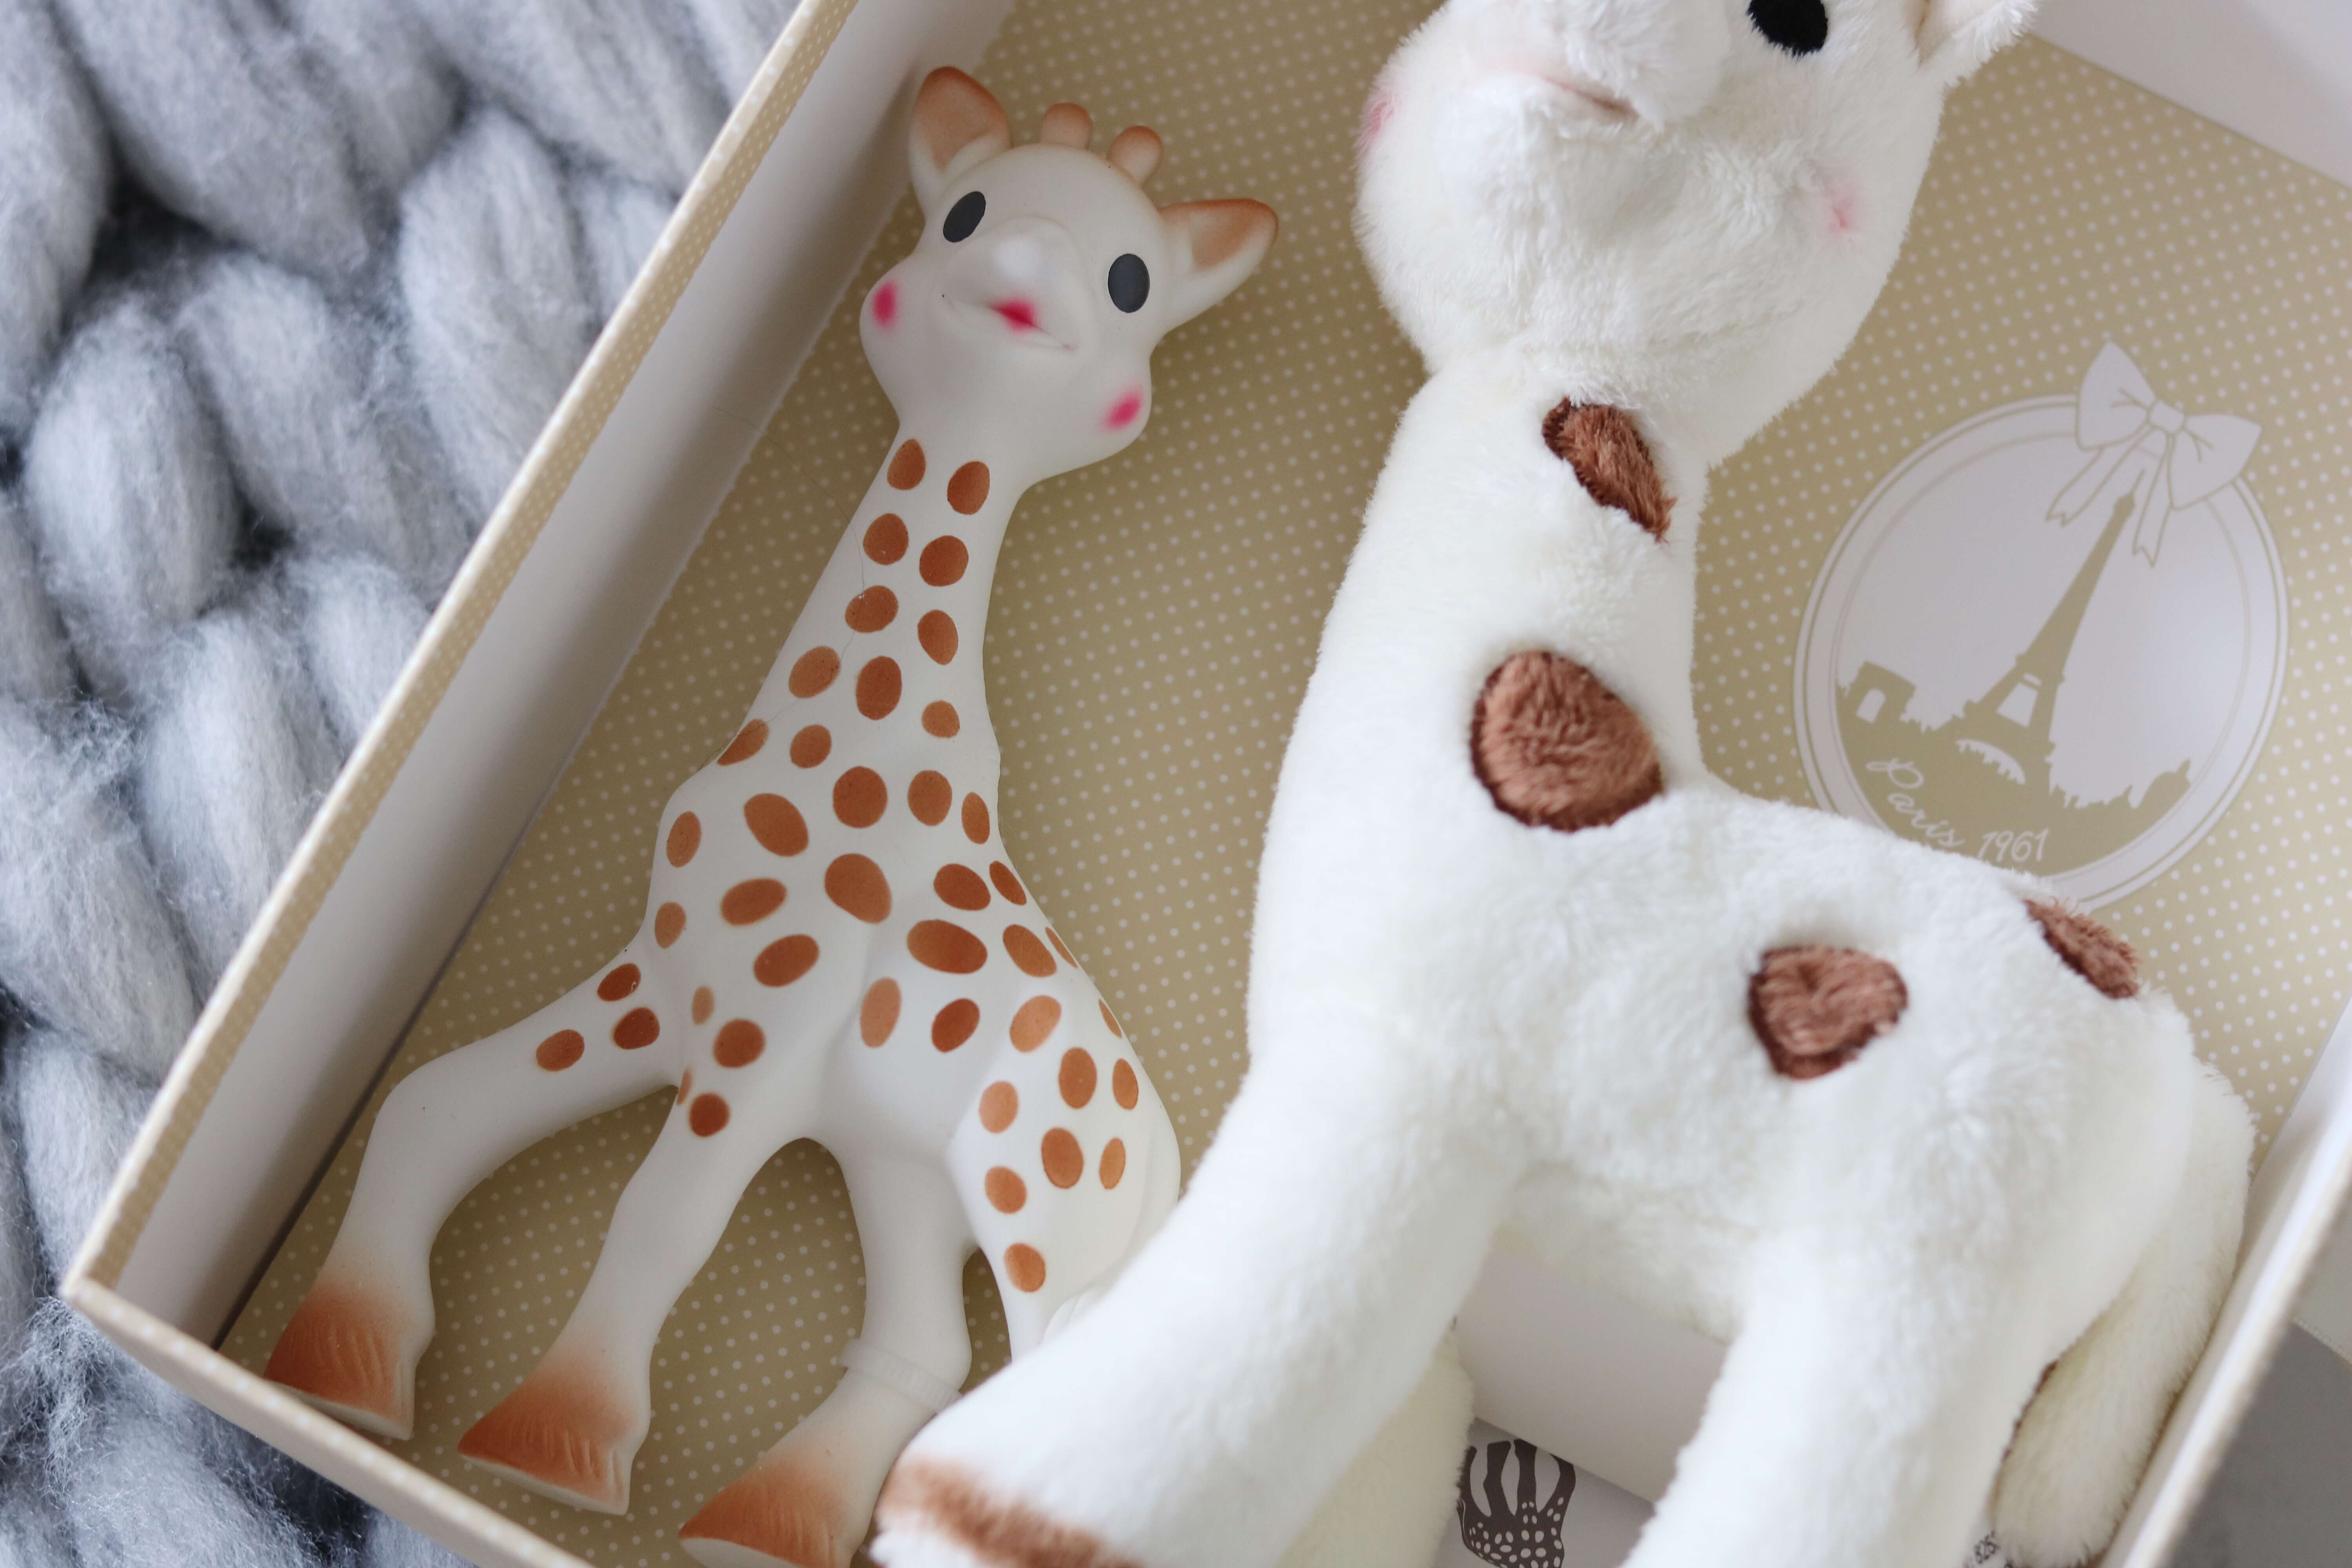 5 Favourite Baby Shower Gifts from buybuyBABY + Fun Gift Wrapping Ideas!  buybuyBABY Whitby